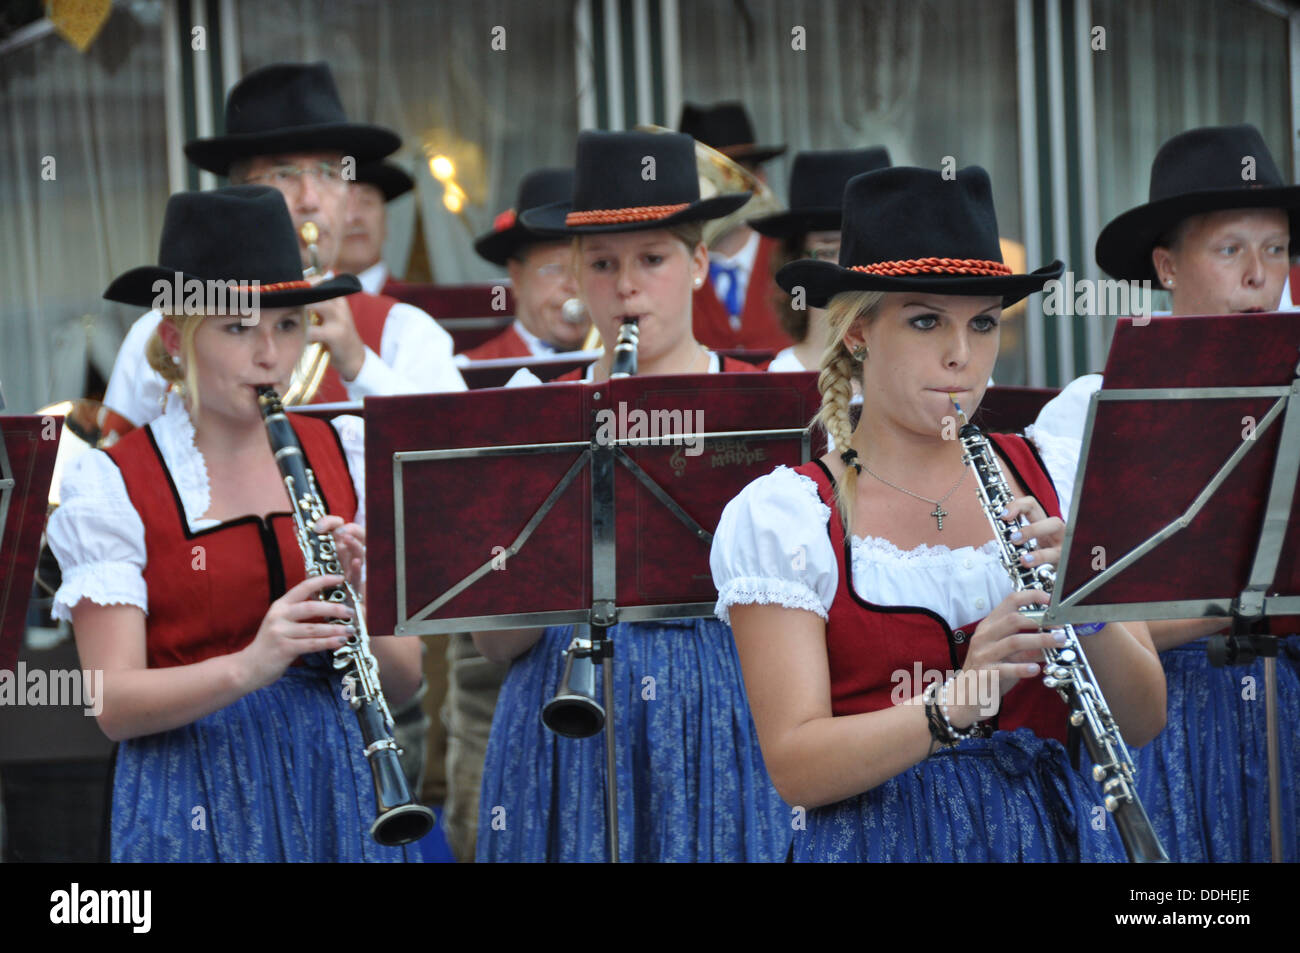 Local folklore band musicians in trditional dress, Maria Alm, Austria  Stock Photo